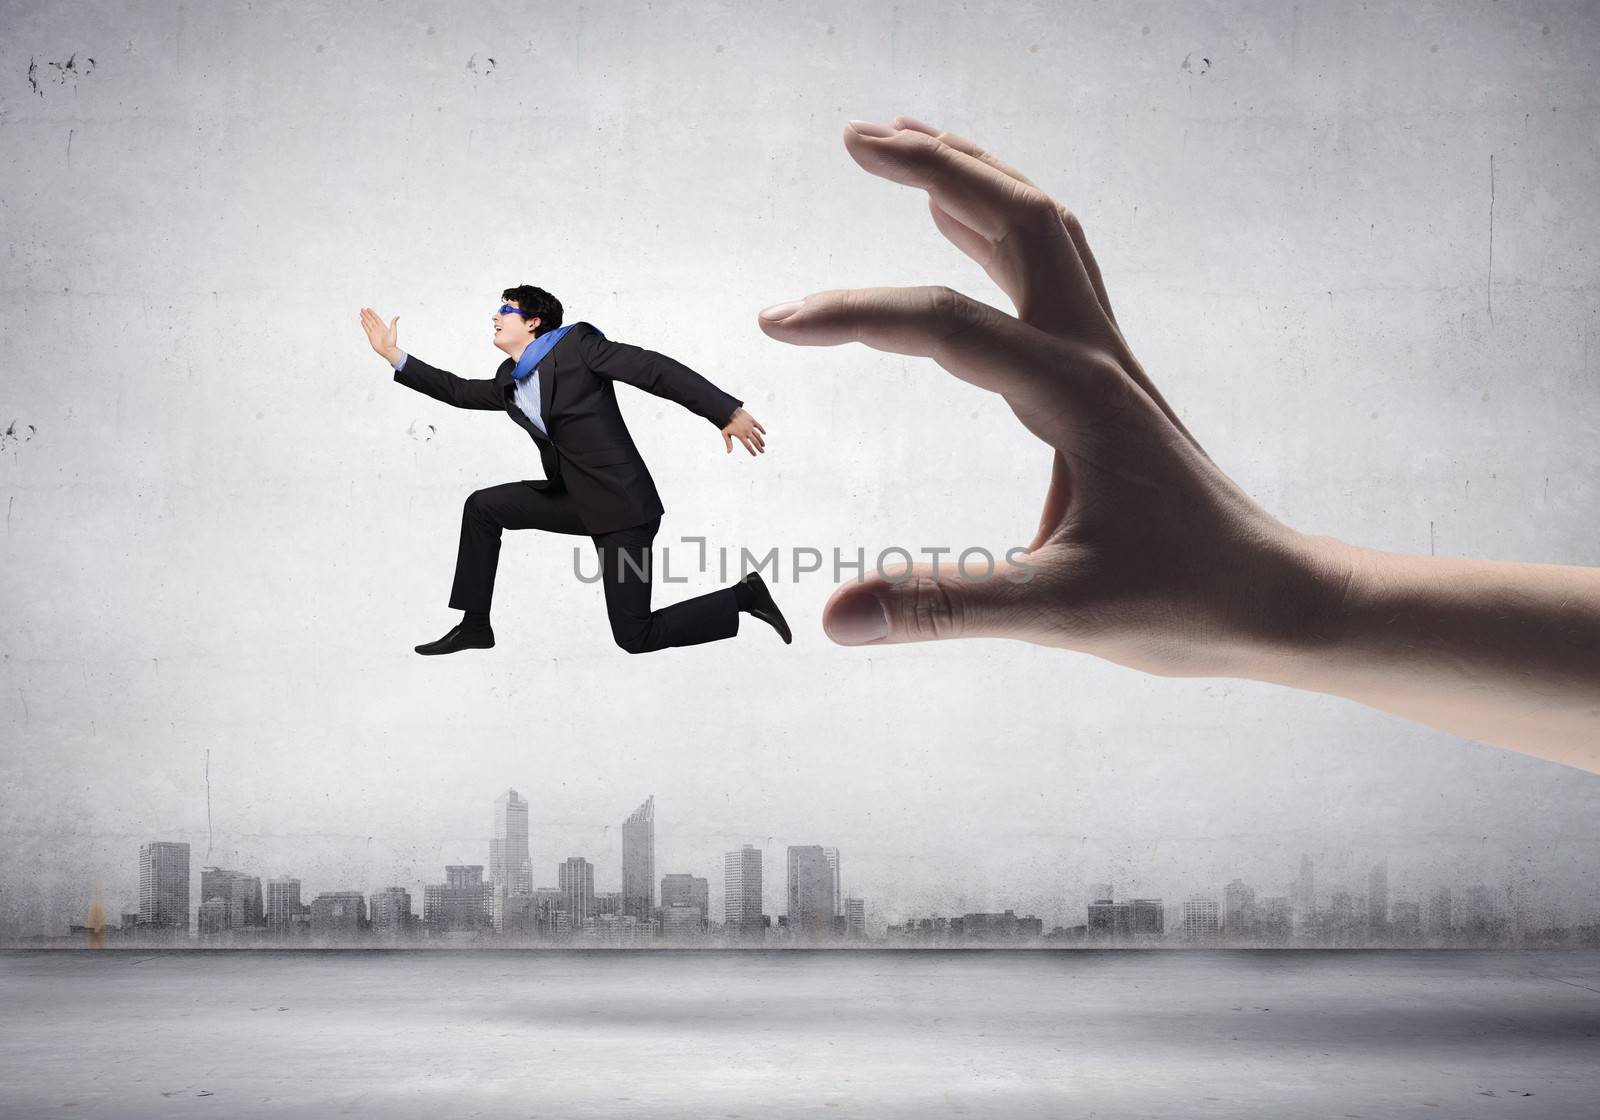 funny image of businessman trying to run away from hand